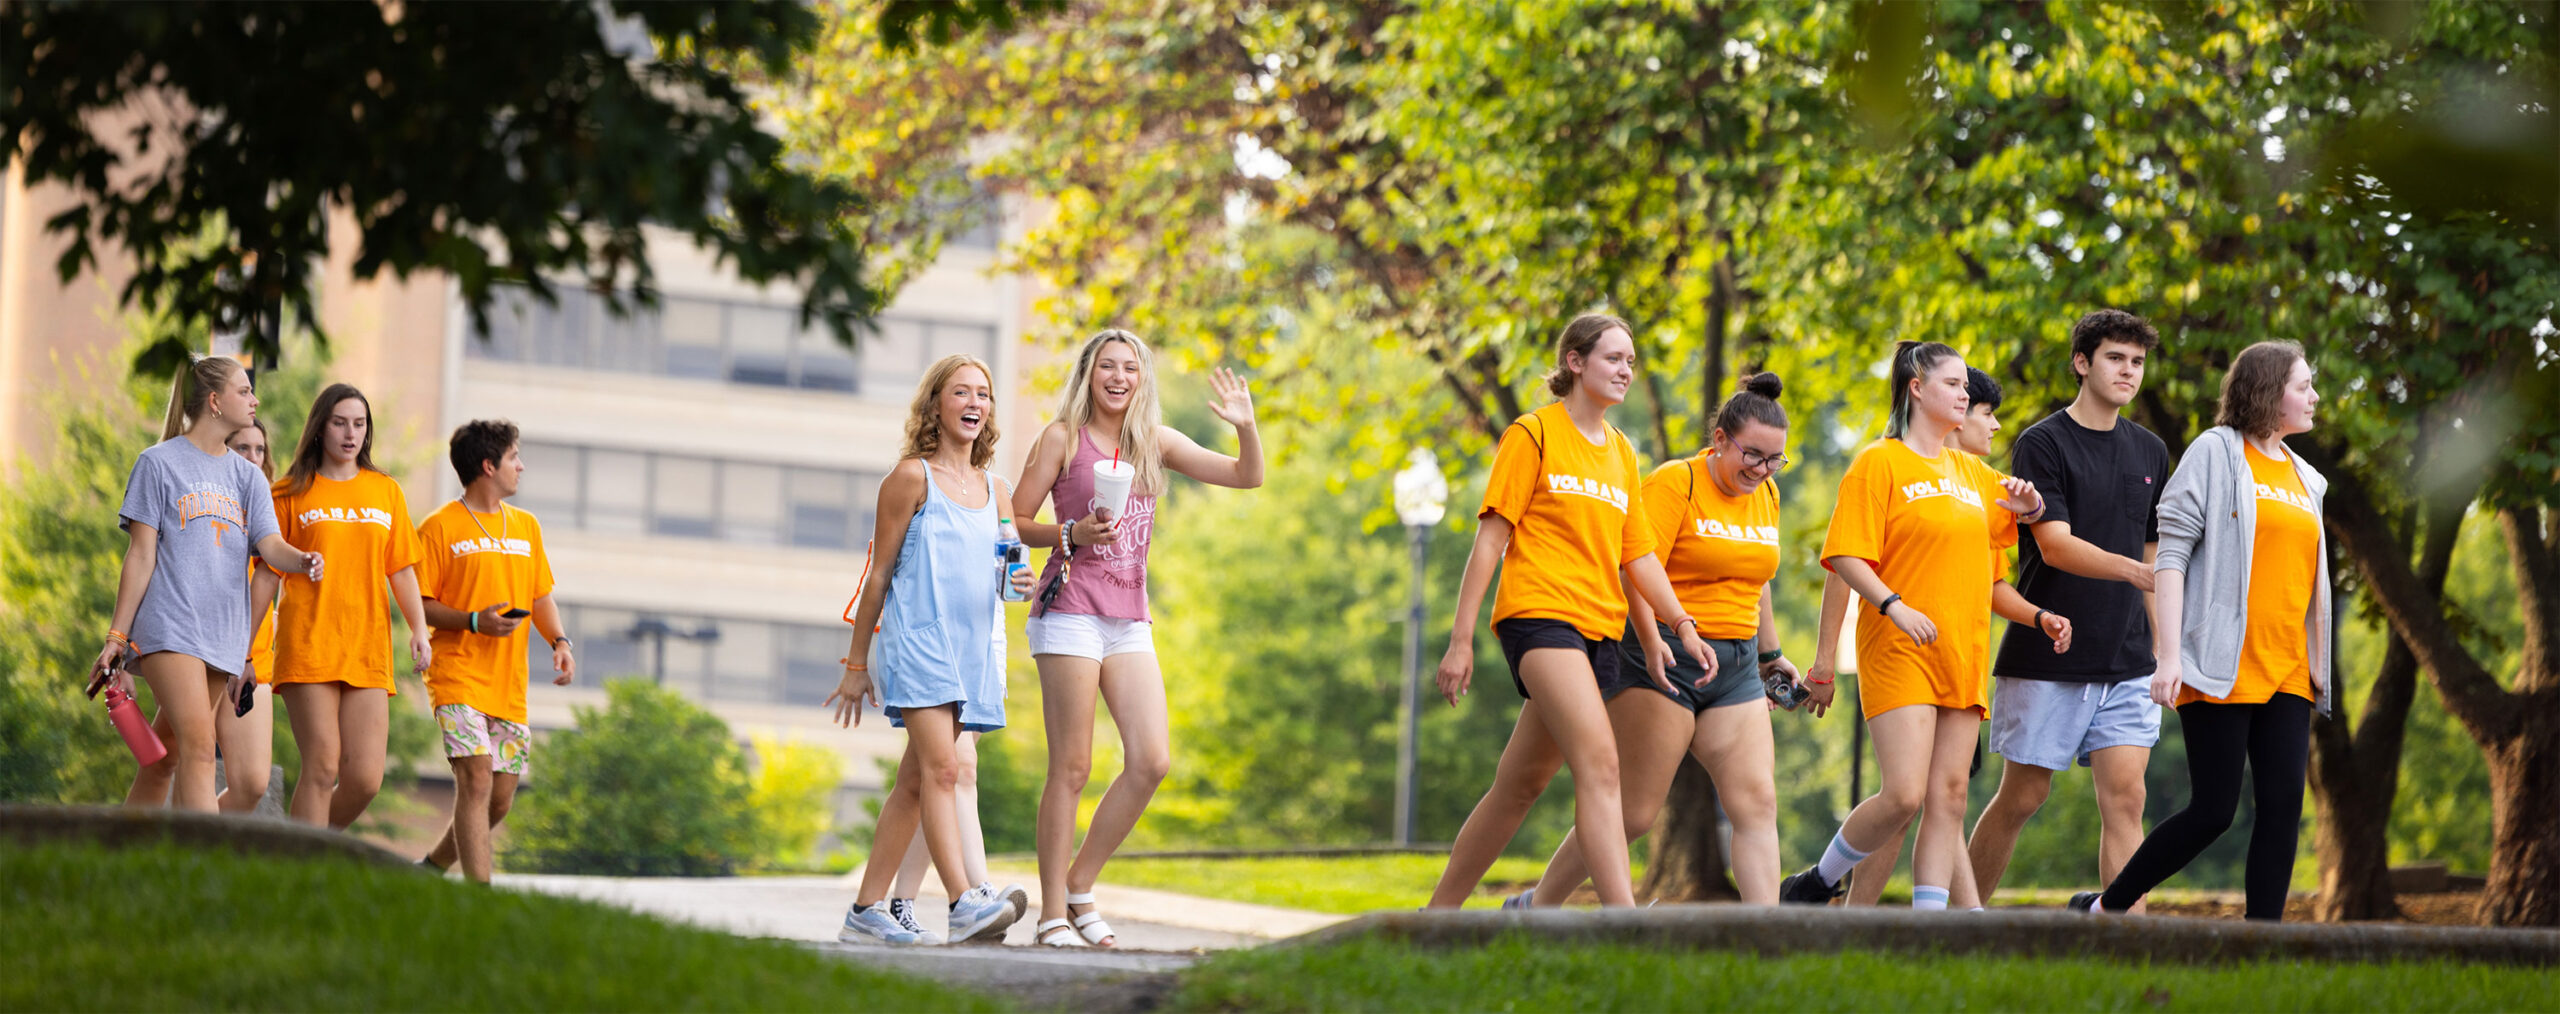 Students walk through a lush campus in early spring wearing bright orange shirts